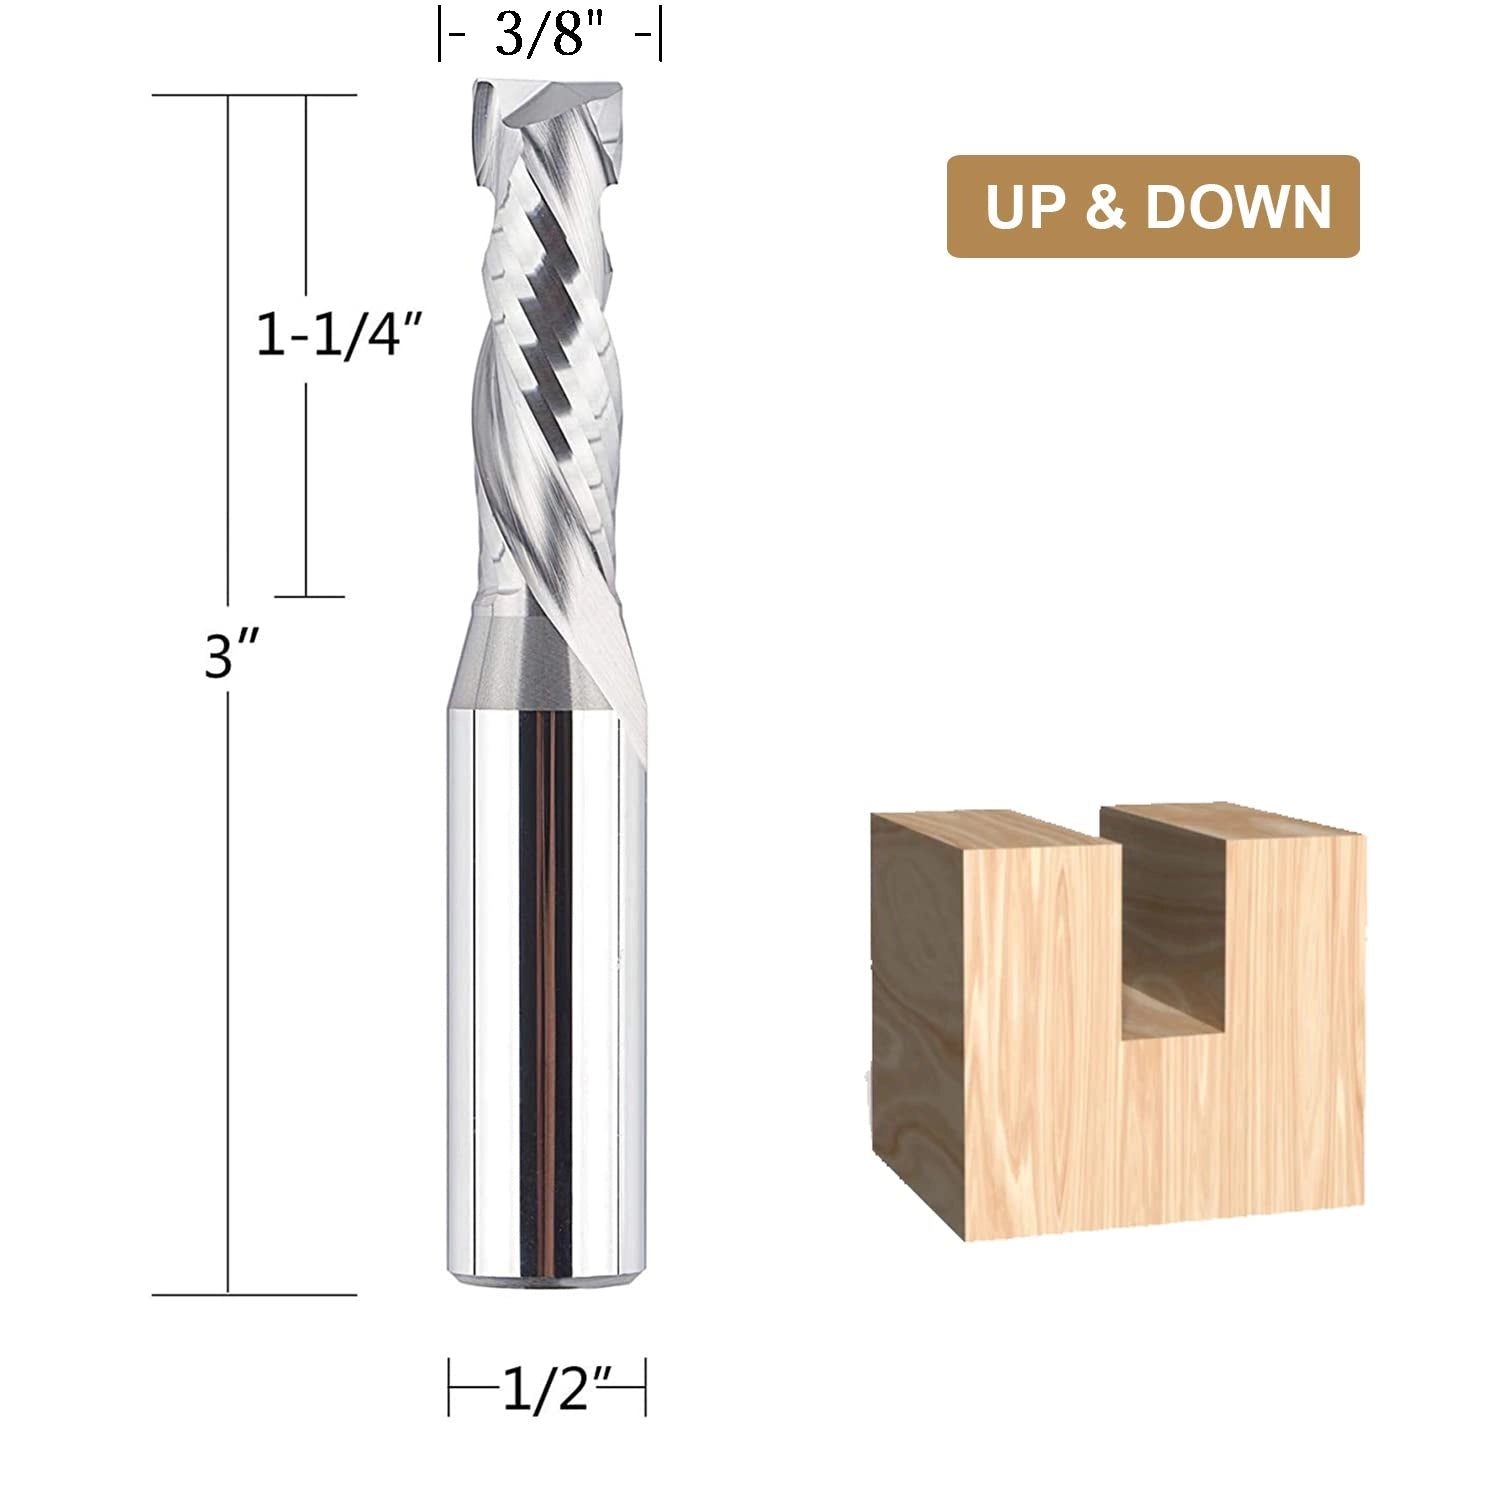 SpeTool 3/8"D 1/2 SHK Compression Spiral Router Bit UP&Down Cut End Mill